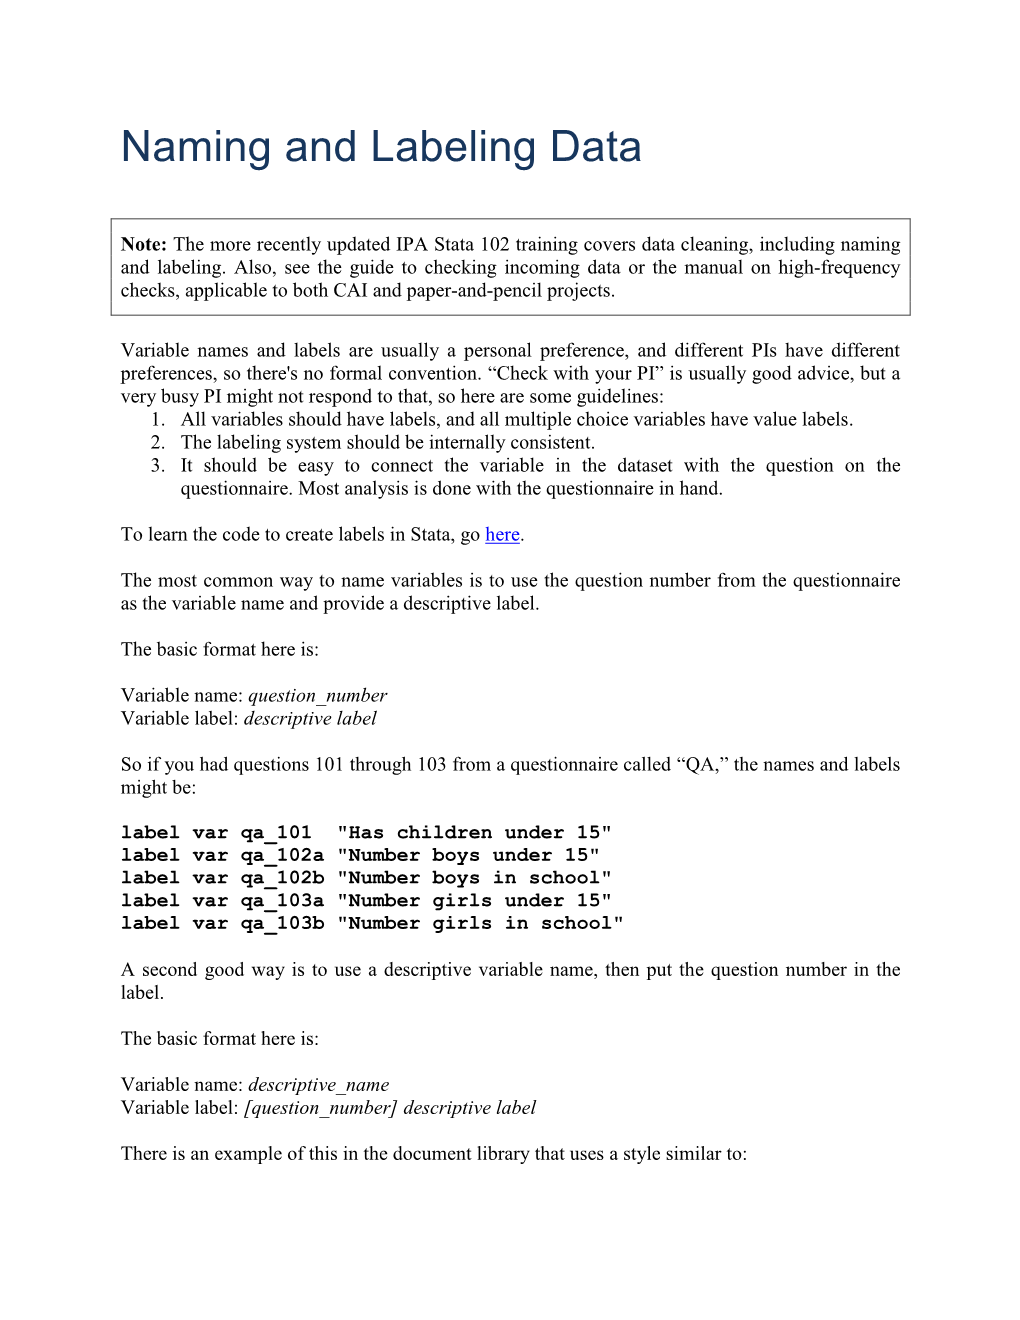 Naming and Labeling Data